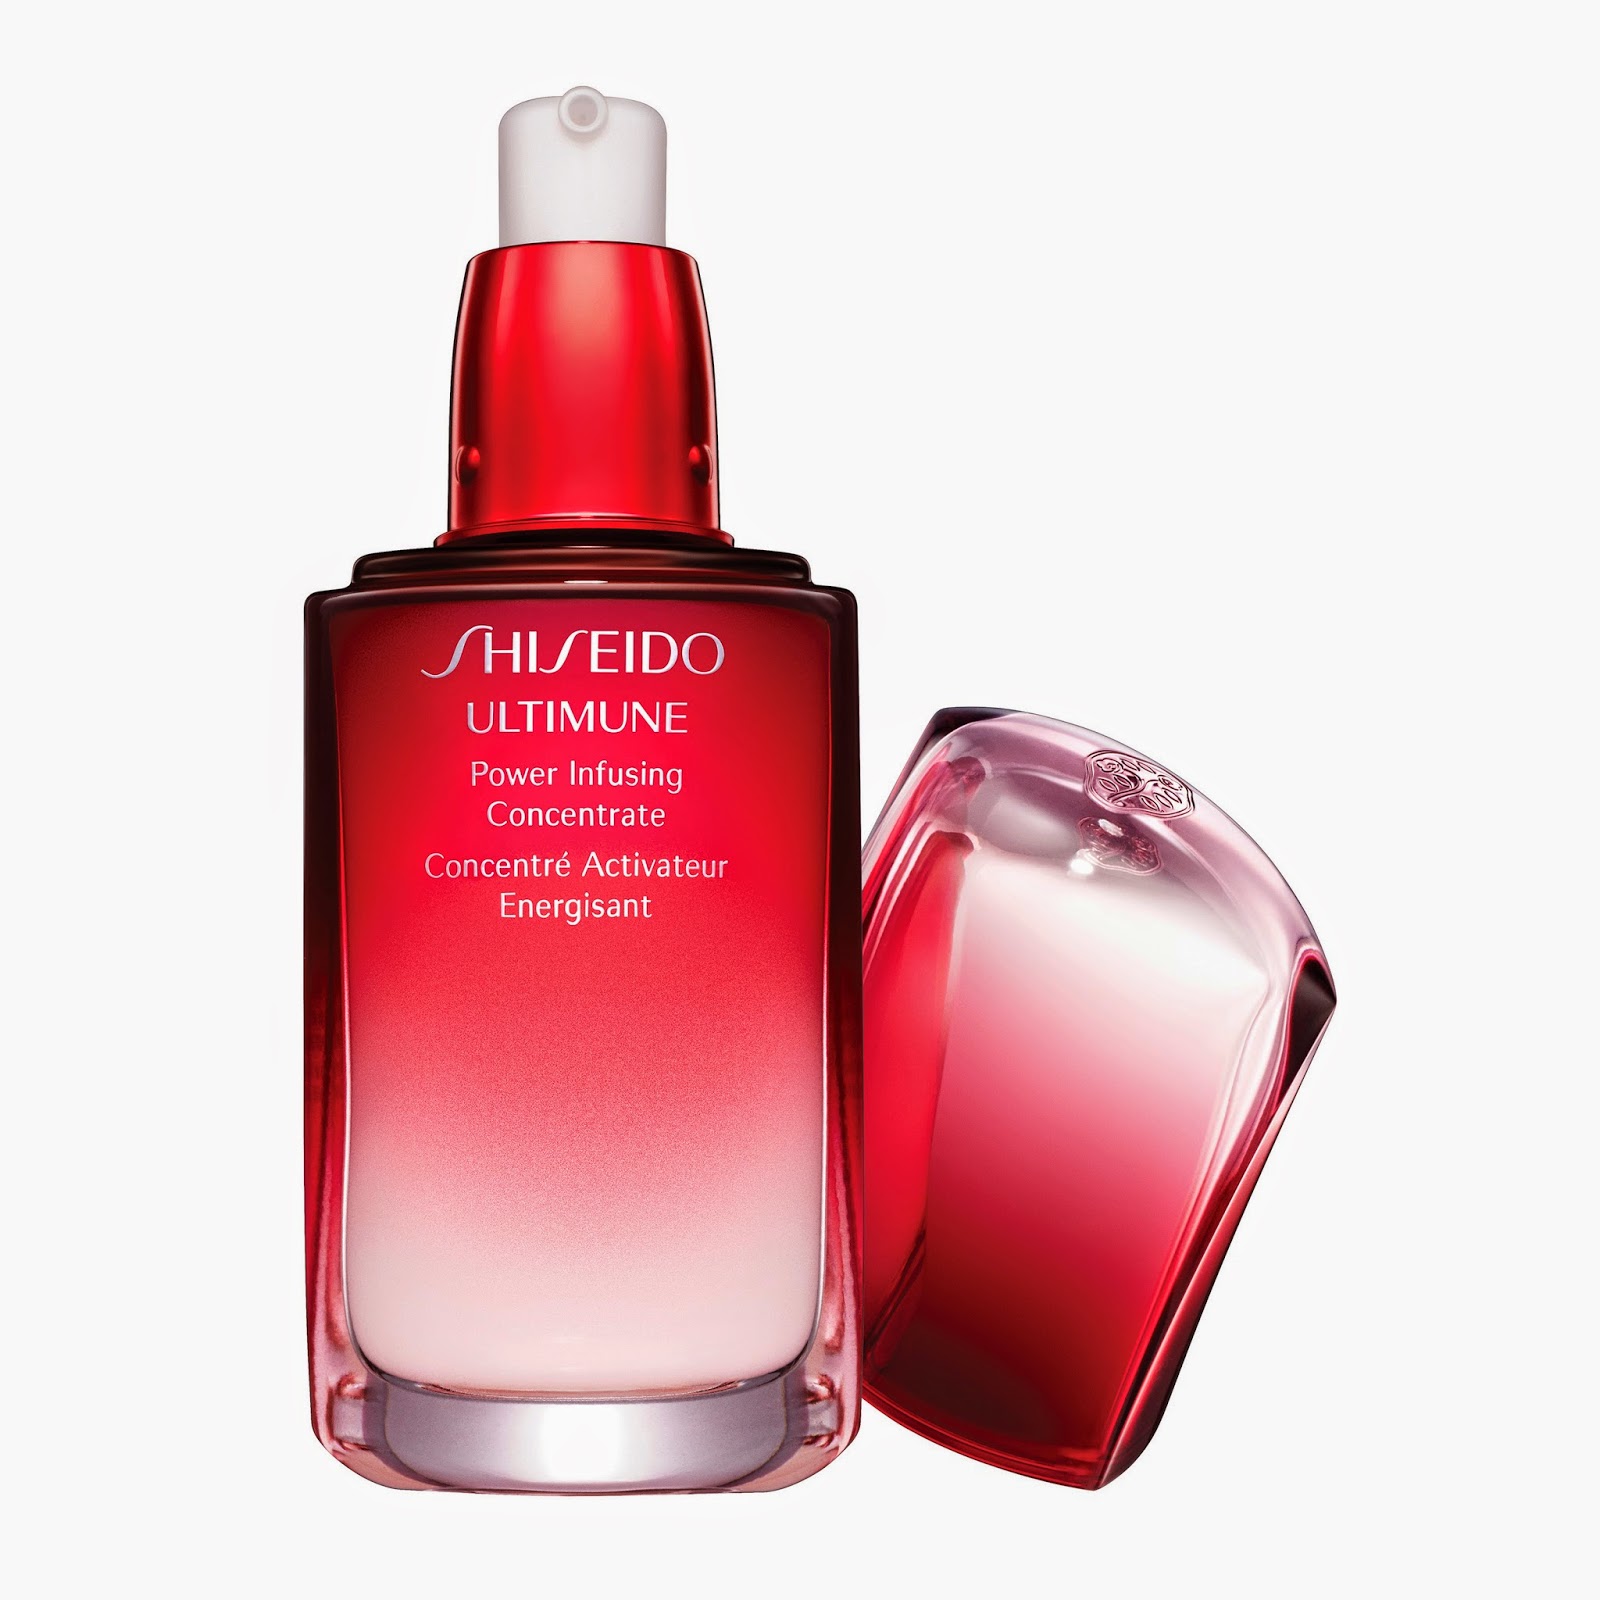 Shiseido concentrate. Shiseido Ultimune Power infusing Concentrate. Ultimune концентрат шисейдо. Концентрат Shiseido Ultimune Power infusing Concentrate. Shiseido Ultimune Power infusing Serum.